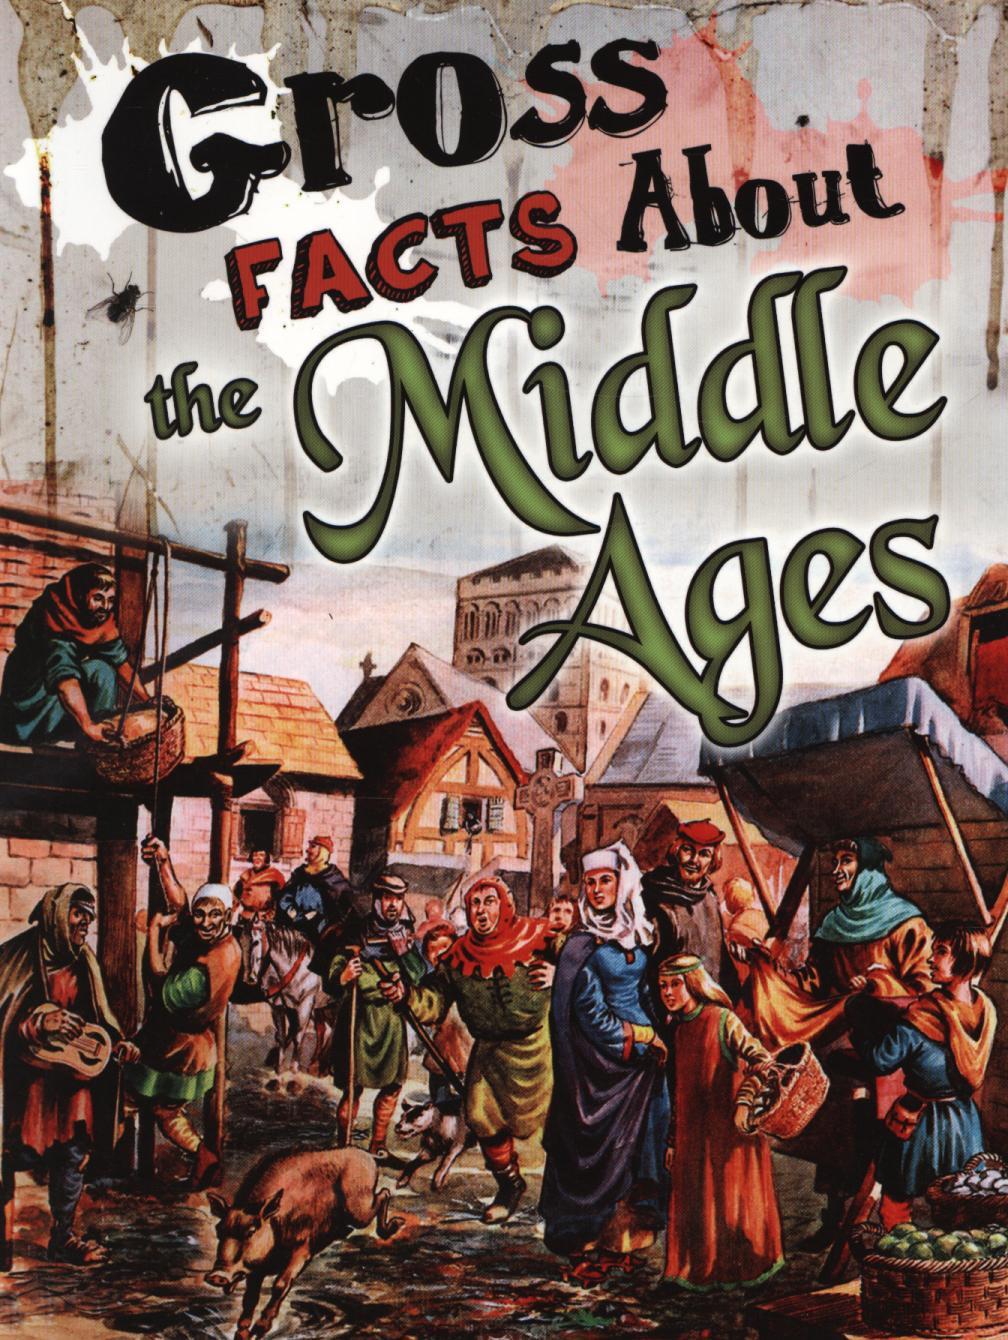 Gross Facts About the Middle Ages